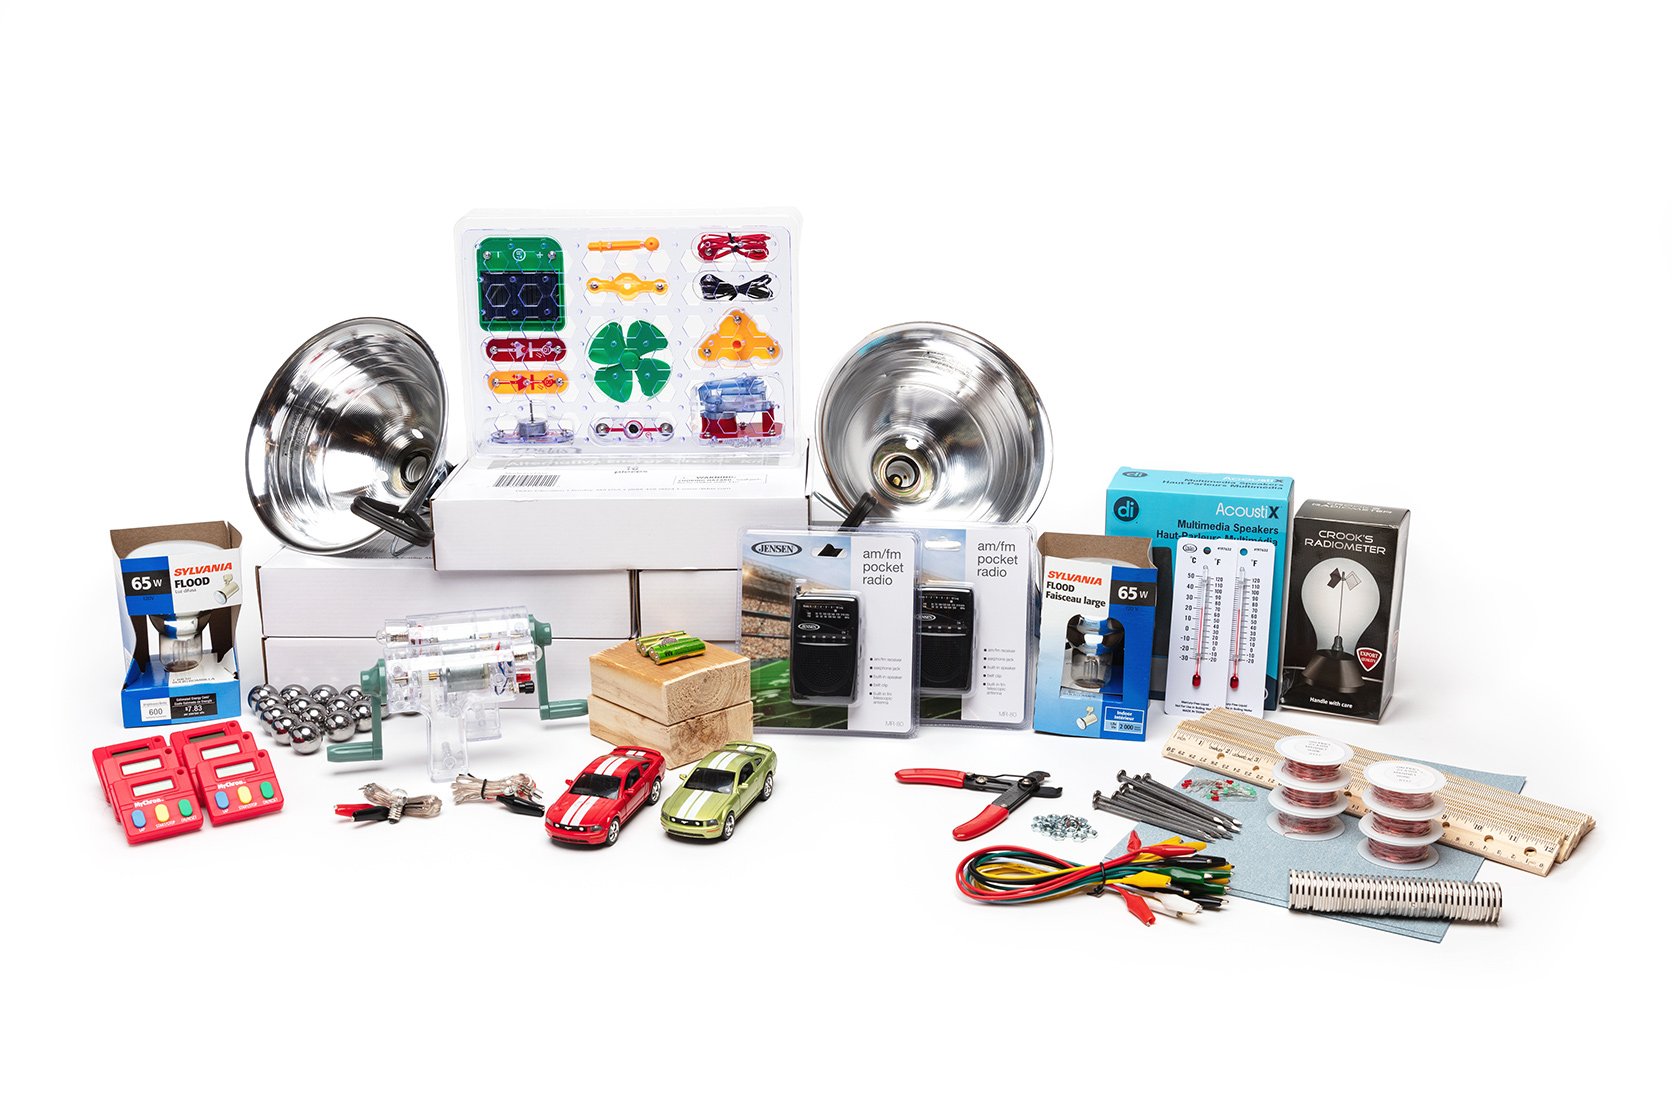 PhD Science hands-on materials kit from Level 4 Module 2 that includes Snap Circuits kits, heat lamps, a radiometer, and alligator clip cords